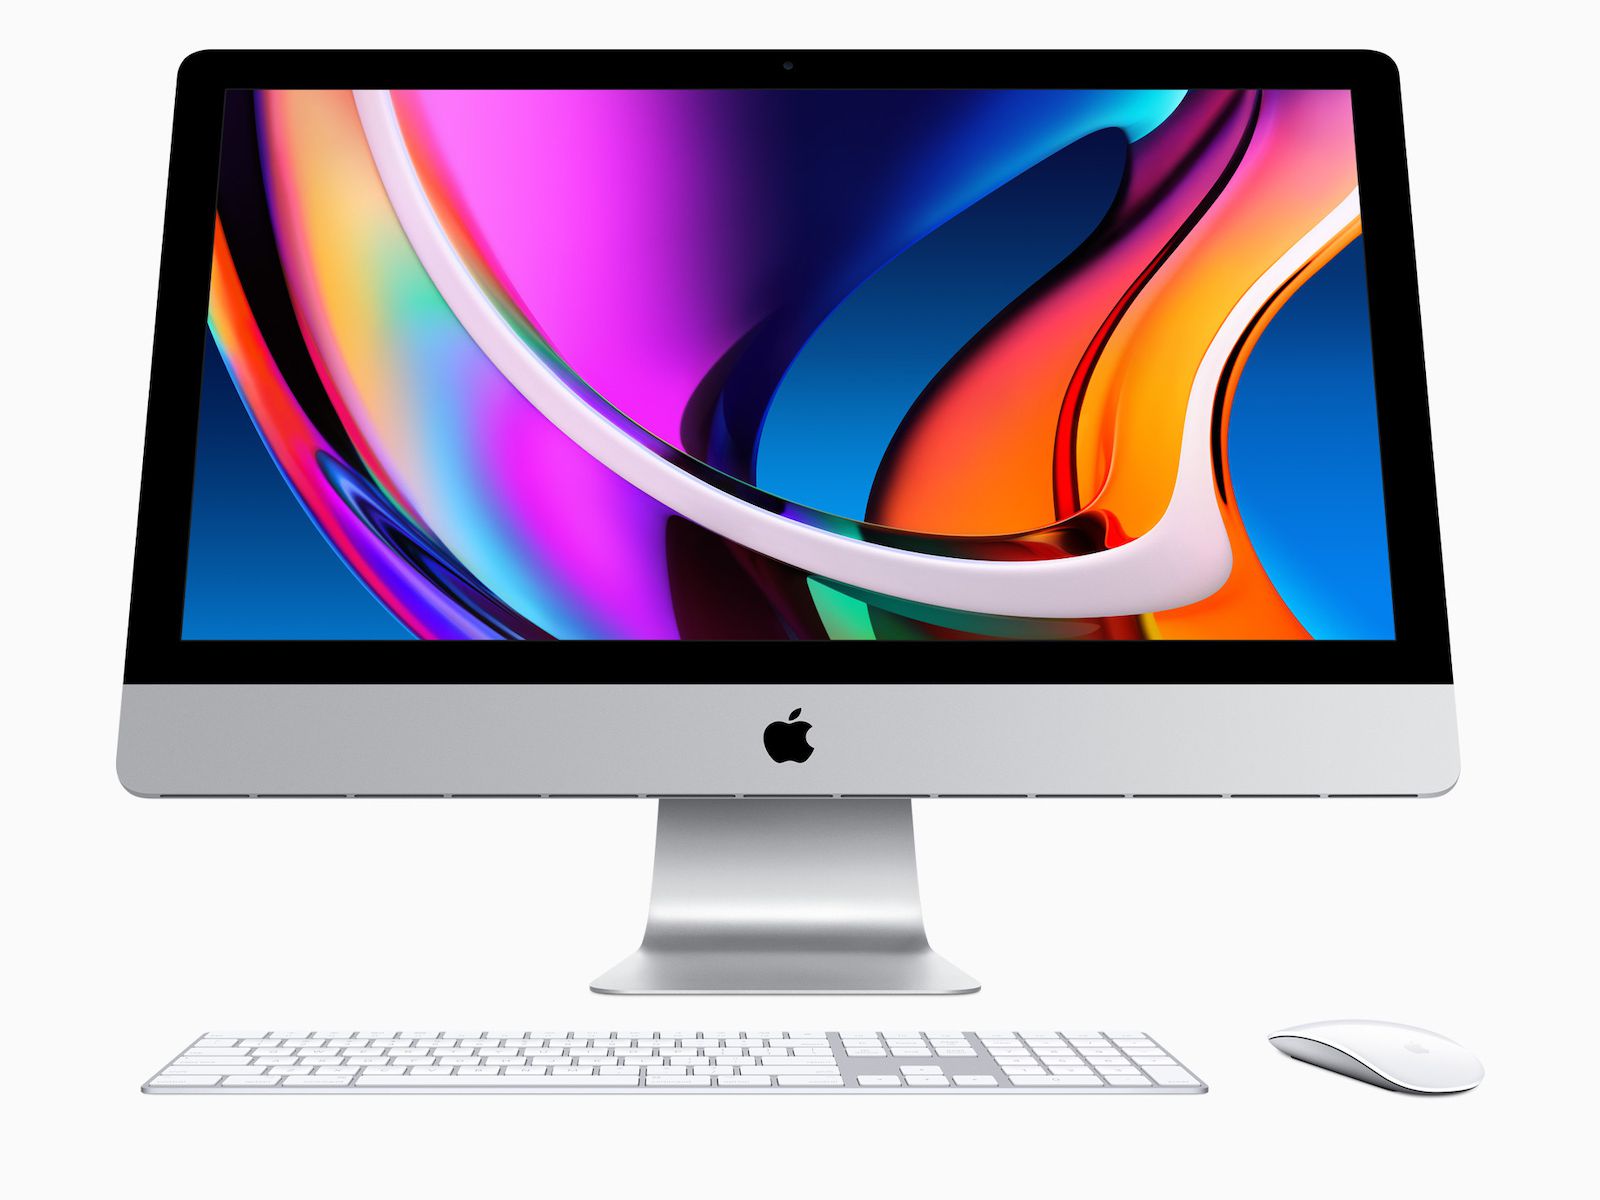 ven biologi kone Third-Party RAM for 27-inch iMac Still Far More Affordable Than Apple's  Checkout Upgrade Options - MacRumors